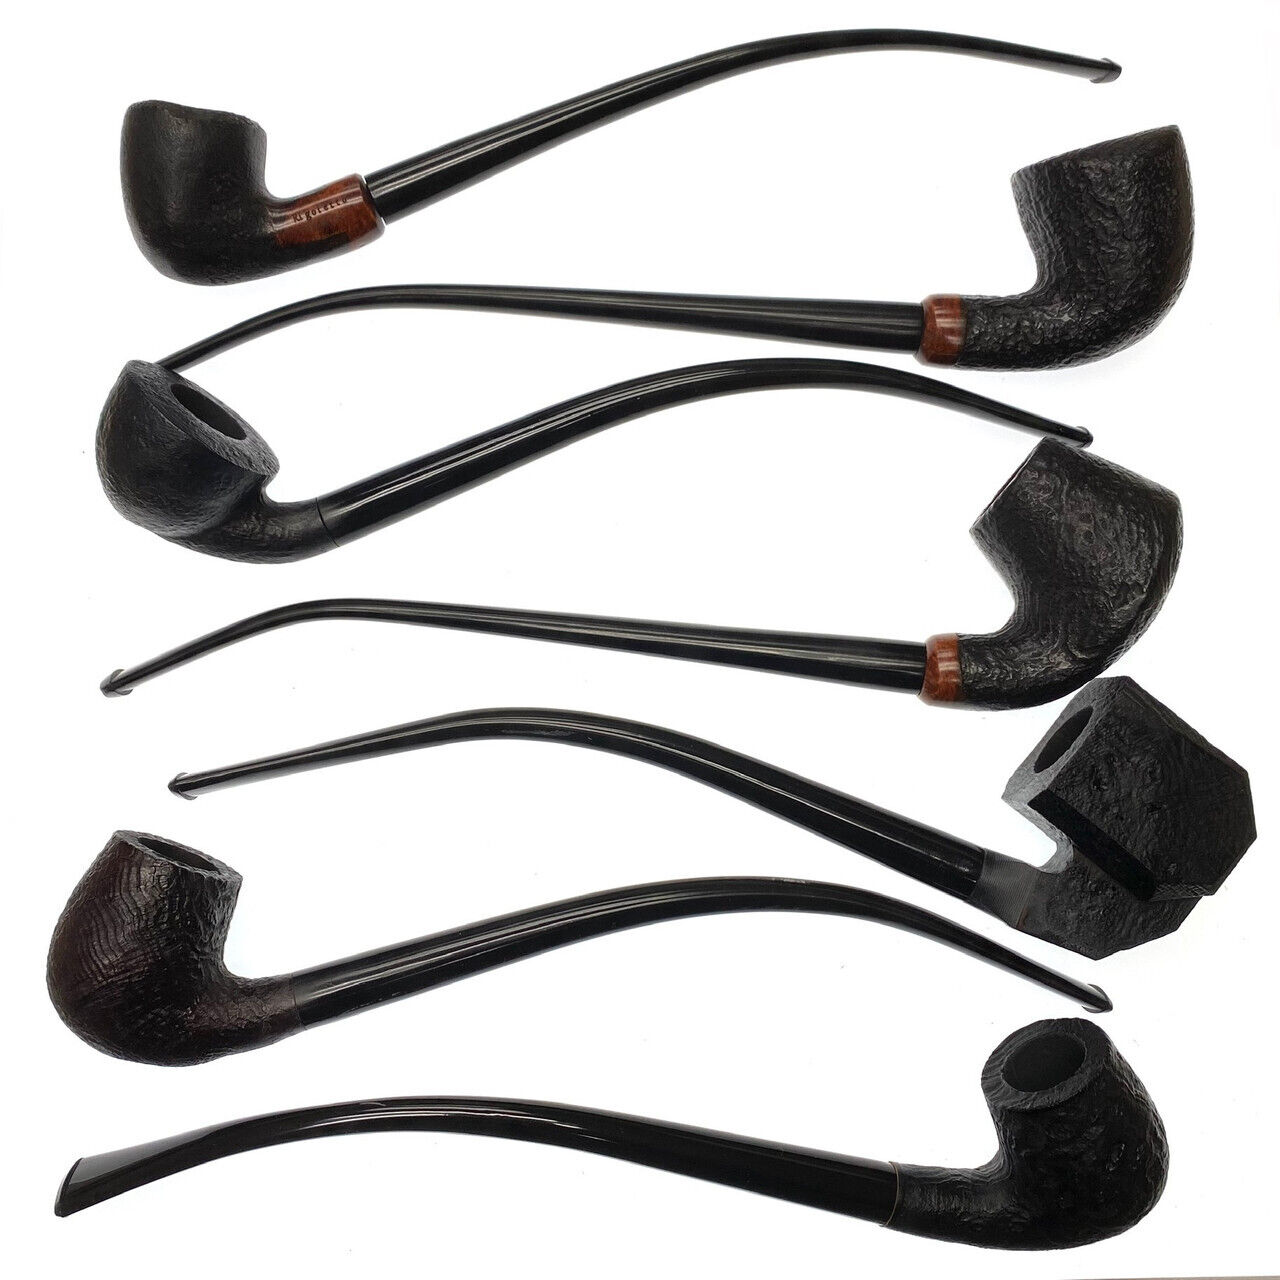 Rustic Italian Churchwarden Selection 1 Count Assorted